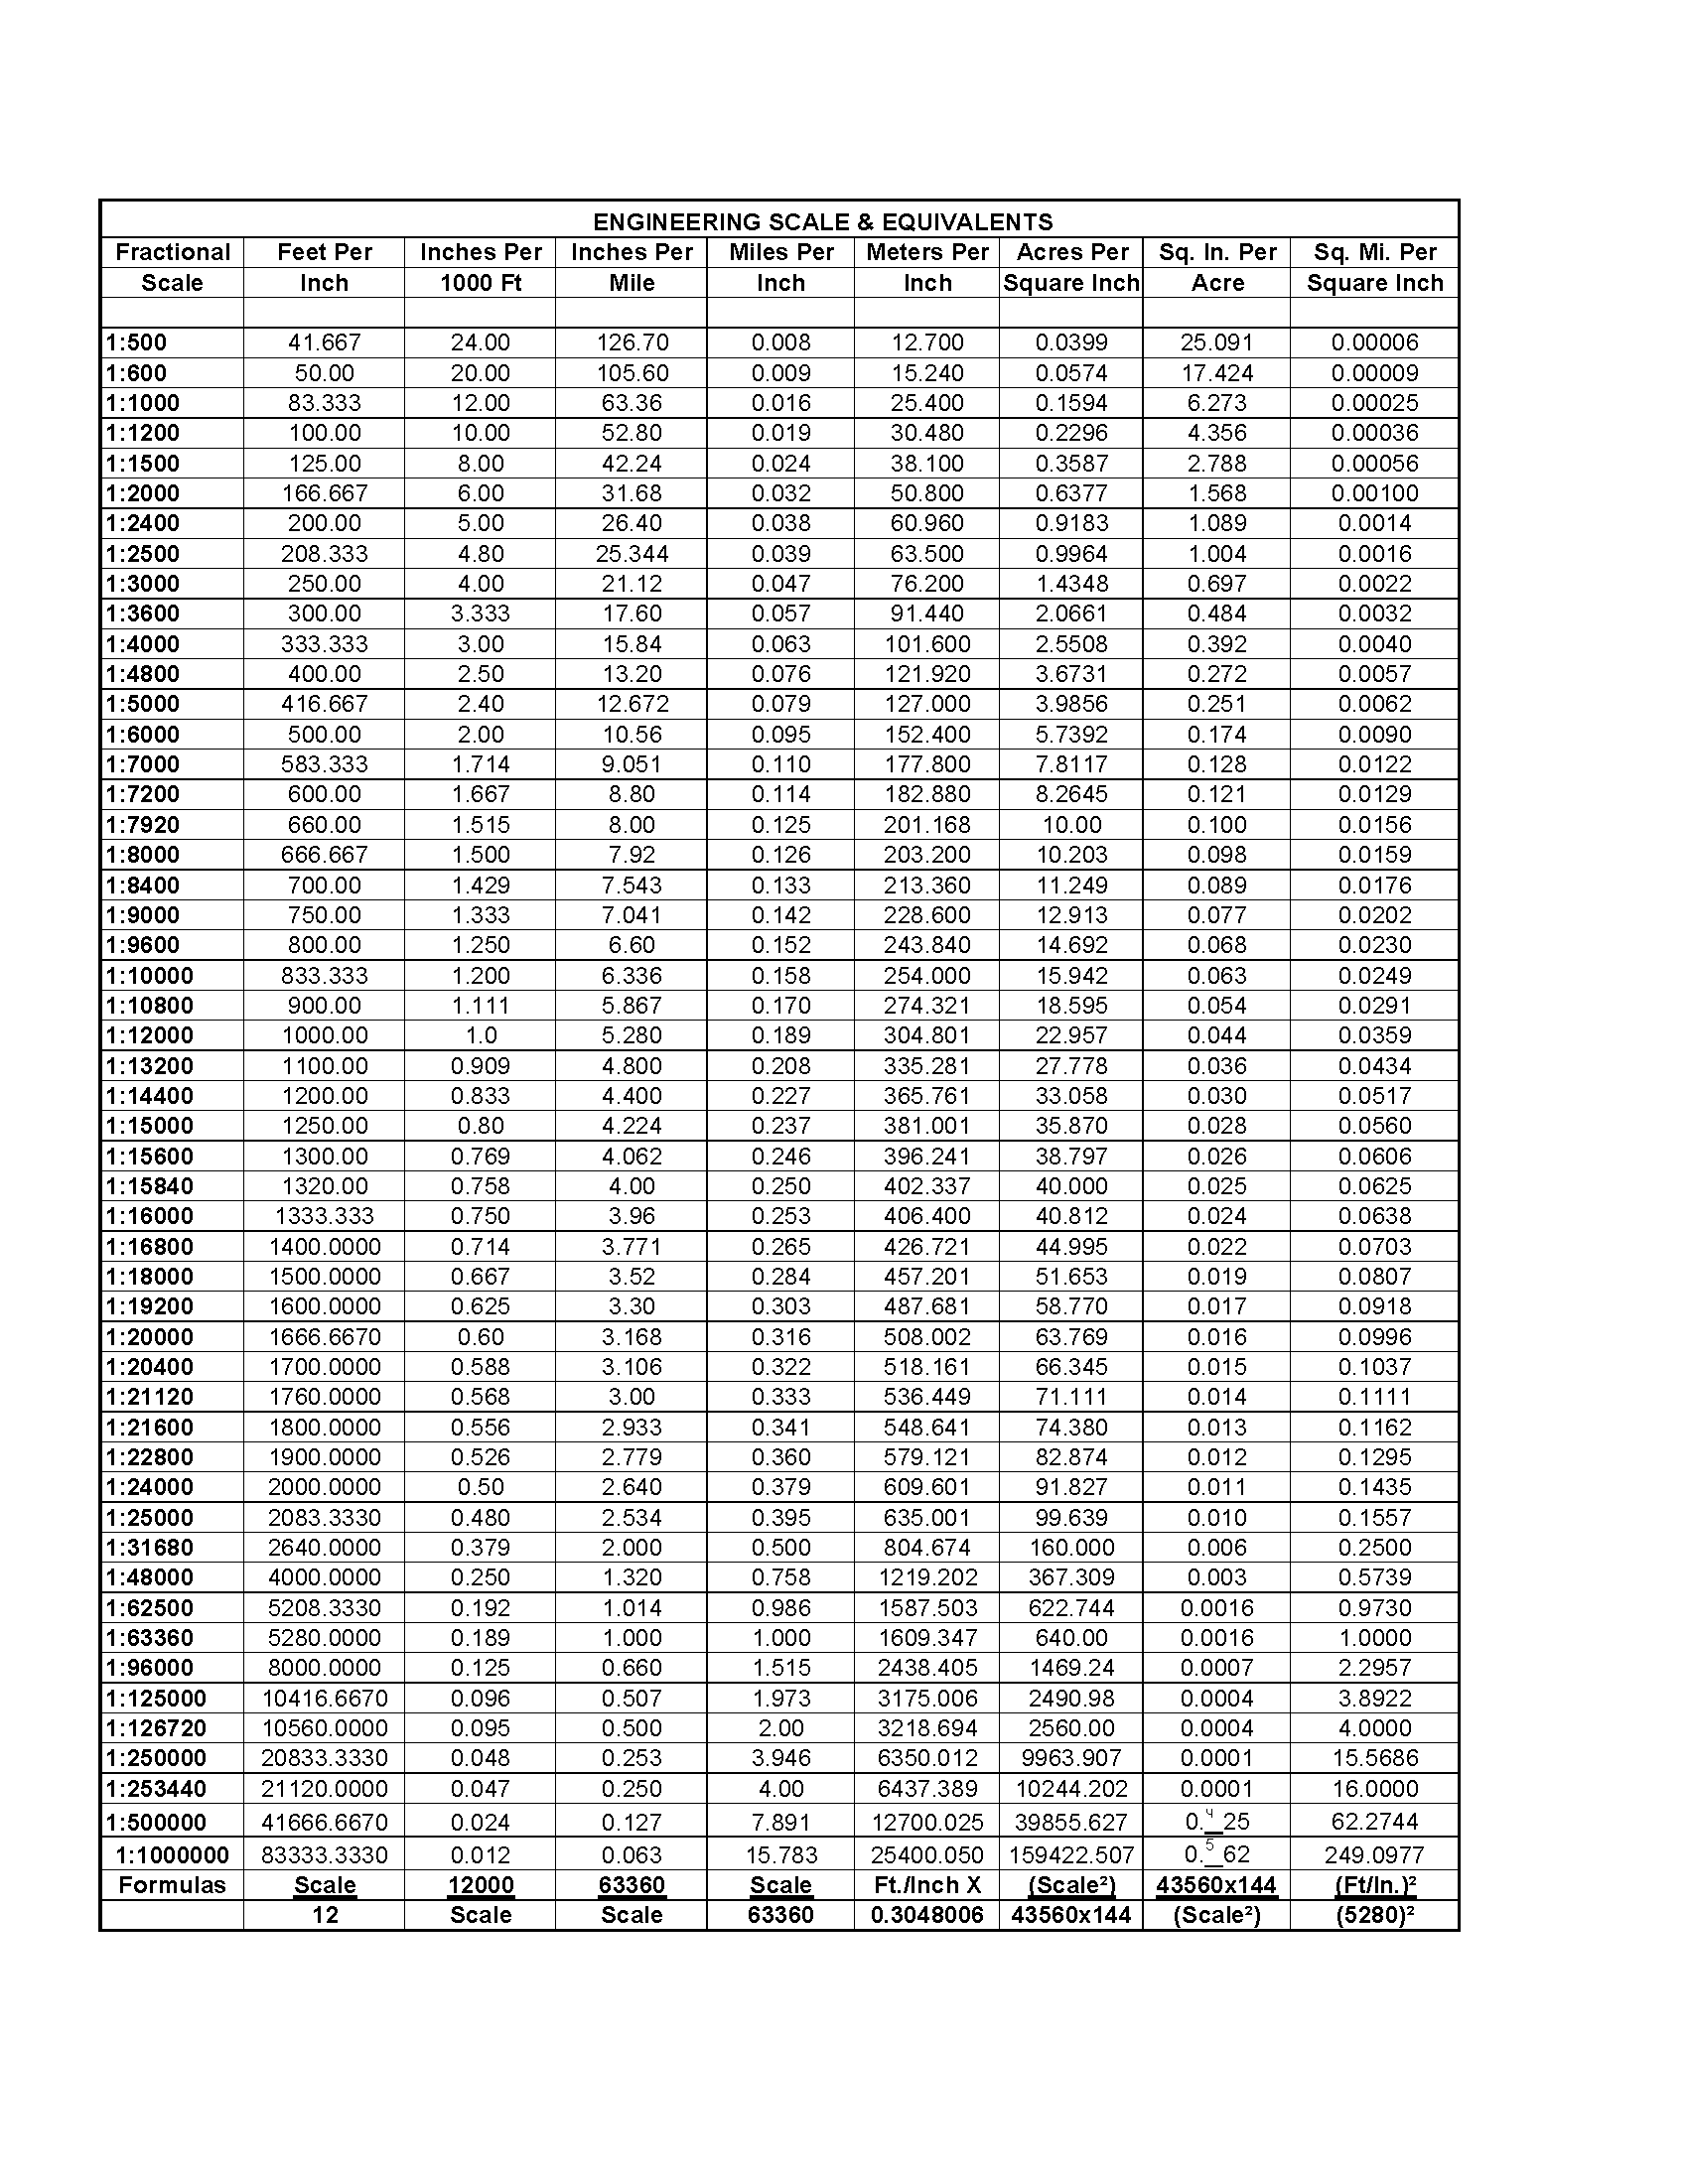 Engineering Scales Equivalent chart